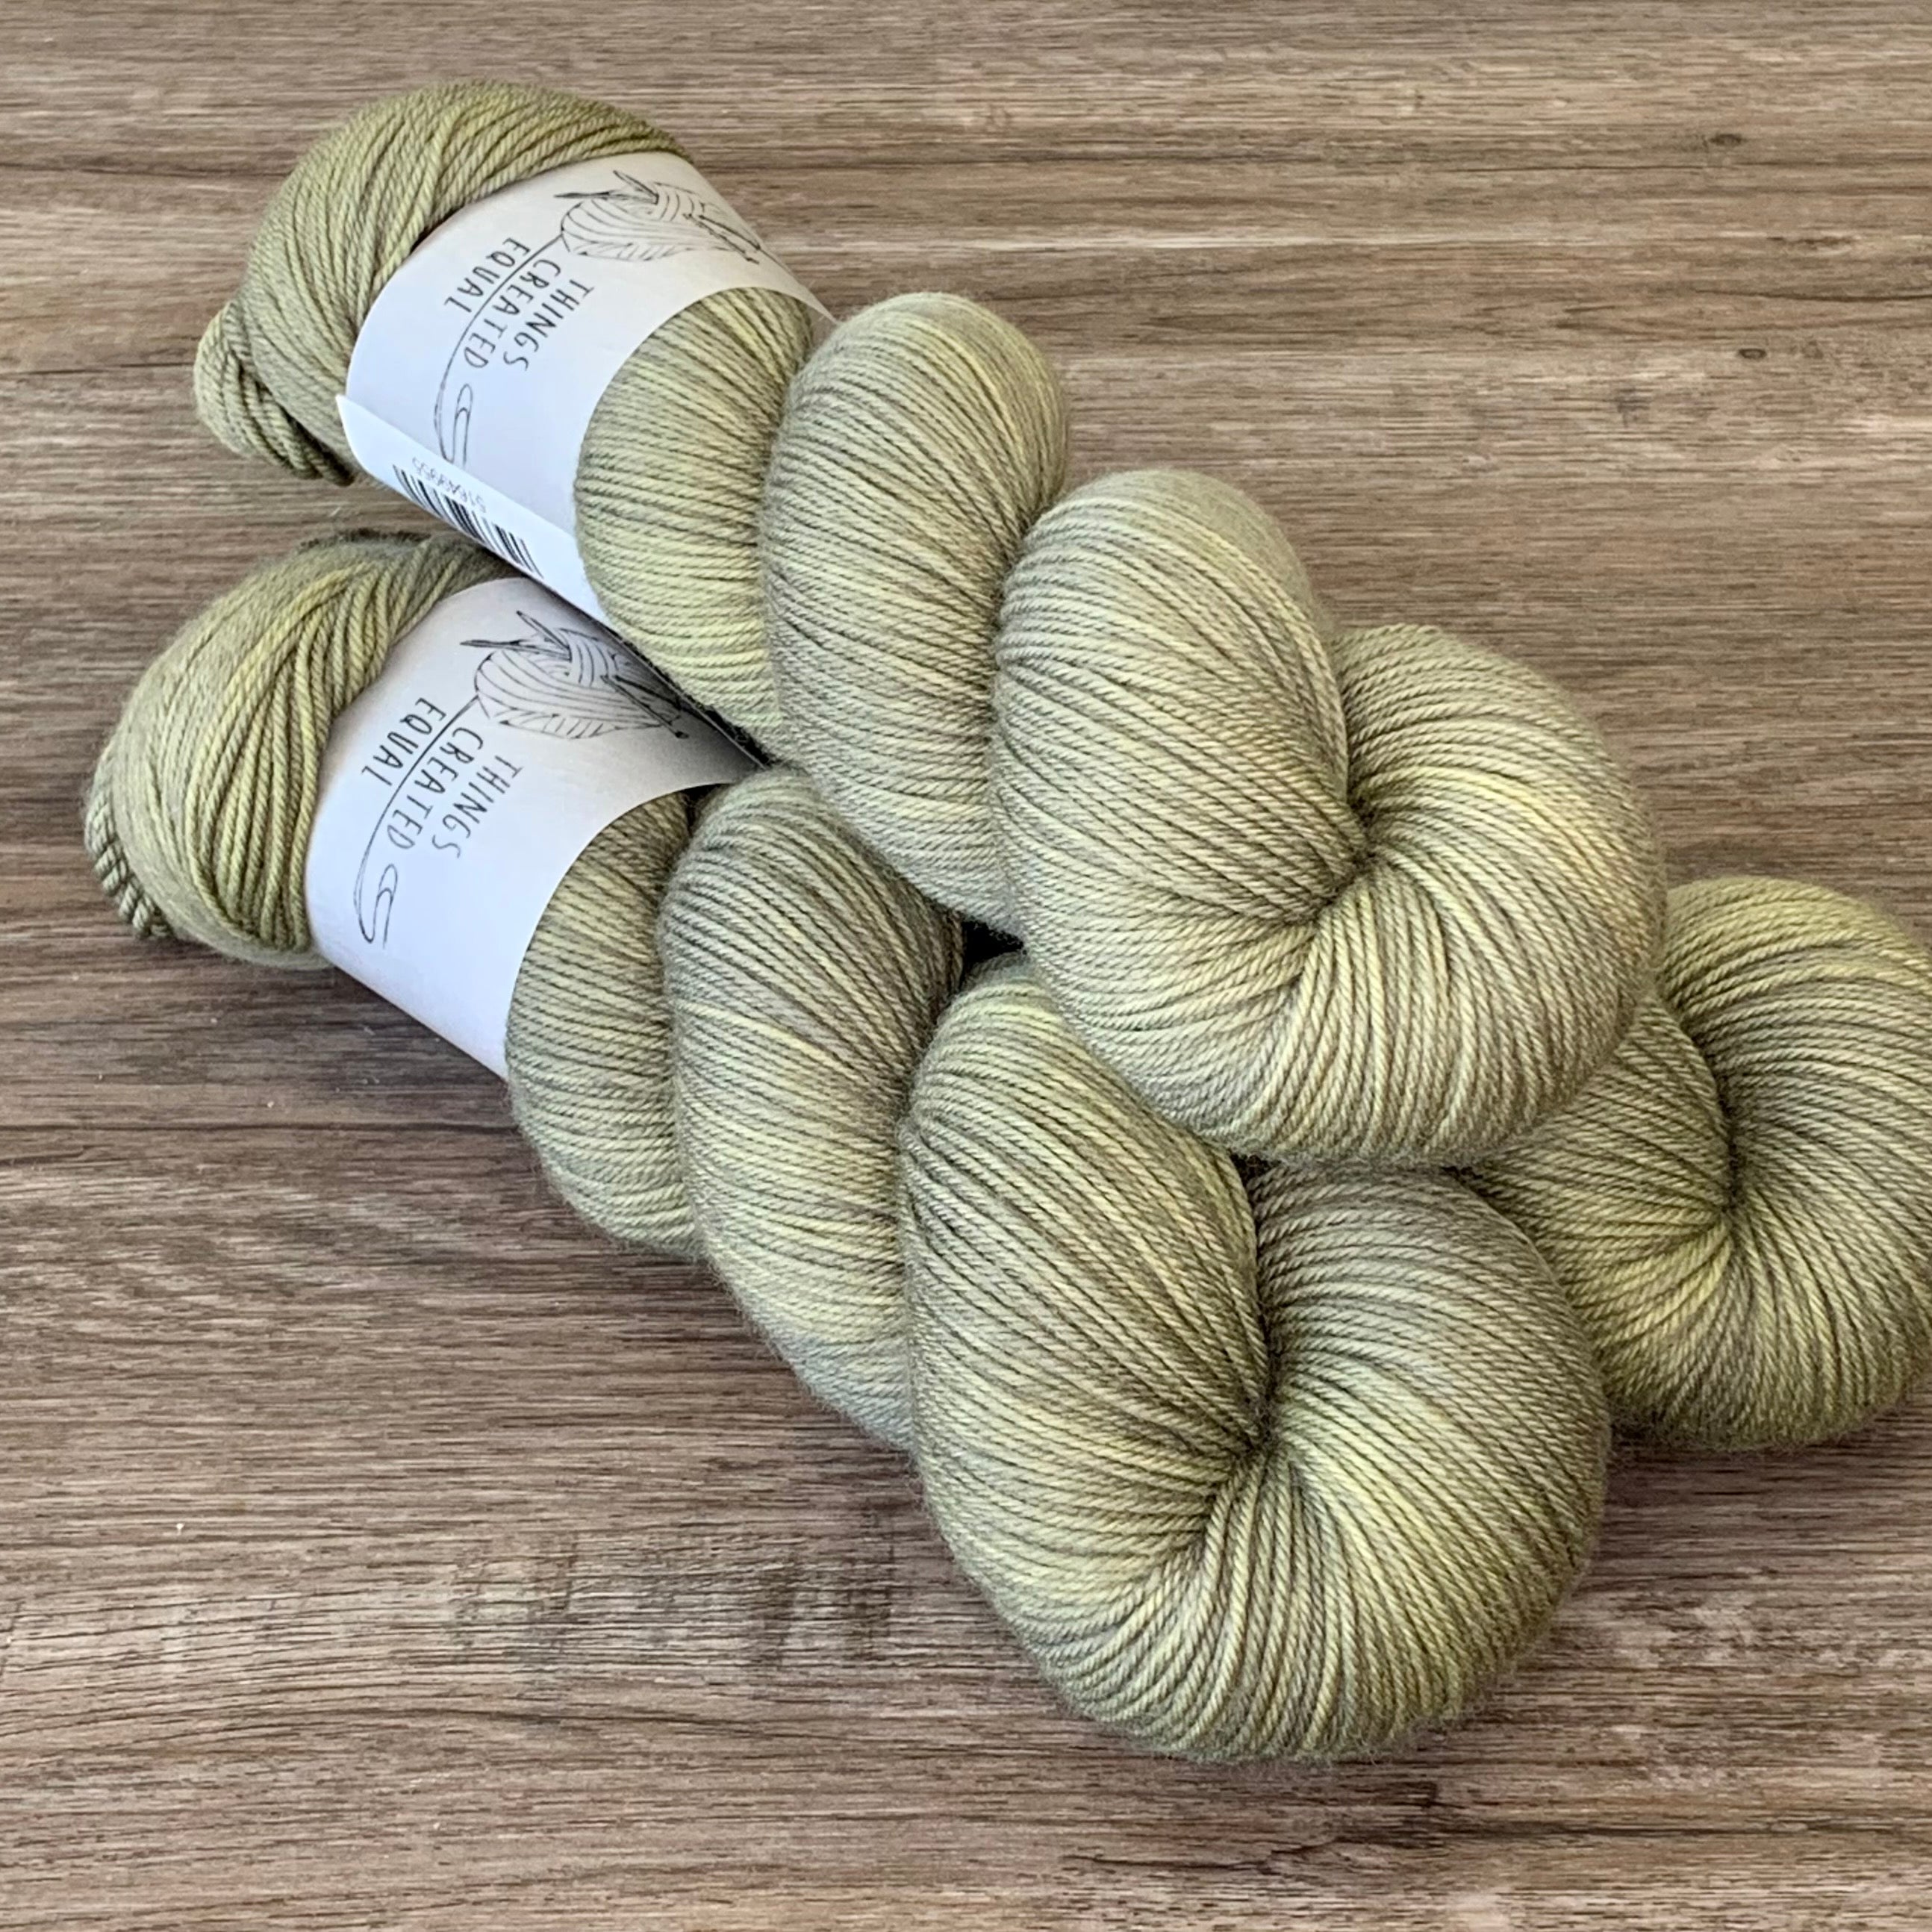 skeins of hand dyed yarn